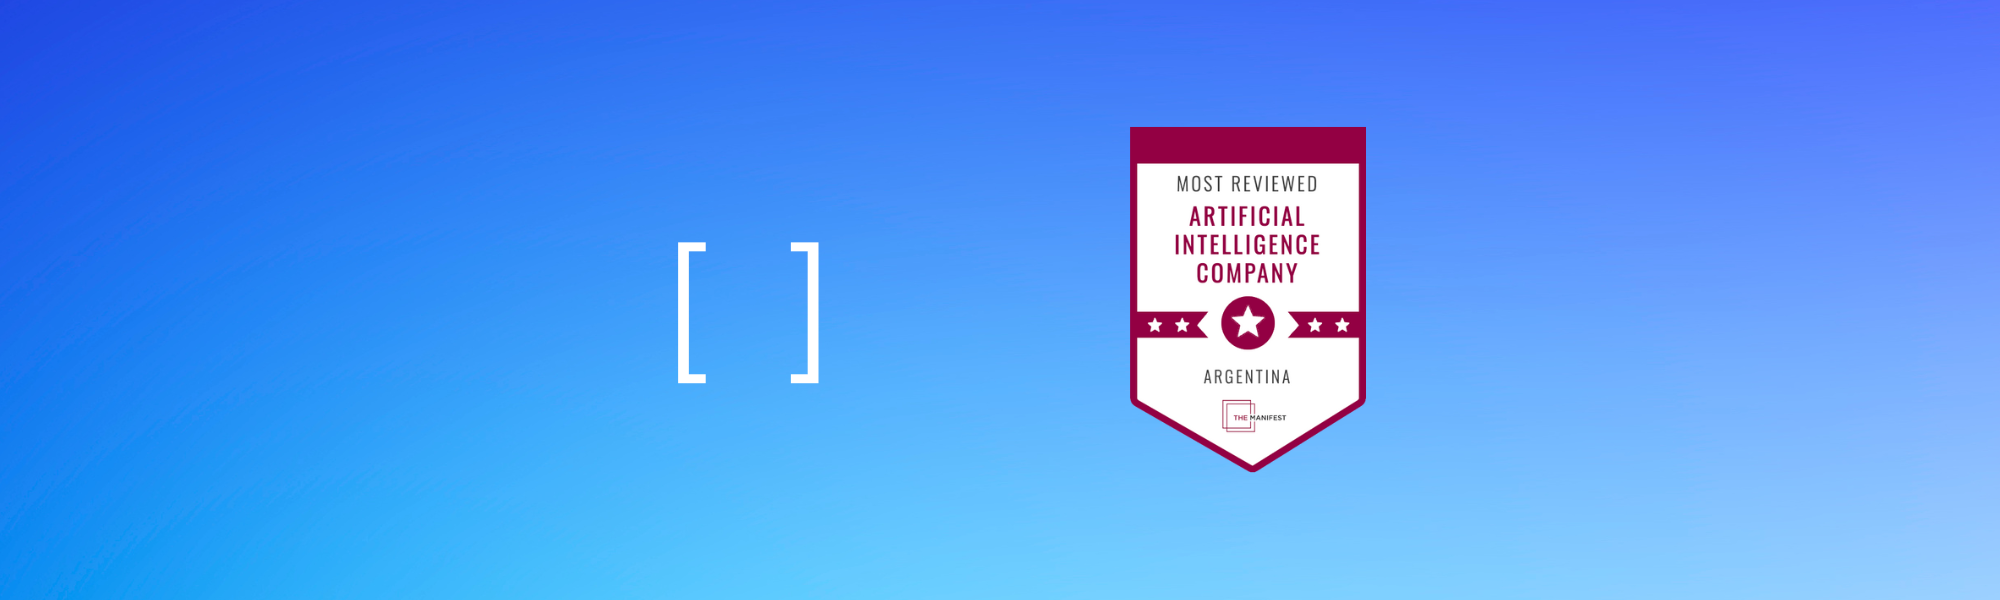 THE BLUE BOX team is proud to share with all of you our latest achievement from the development industry! Ladies and gentlemen, weâ€™ve been recently recognized as one of the most-reviewed AI developers in Argentina by none other than The Manifest.